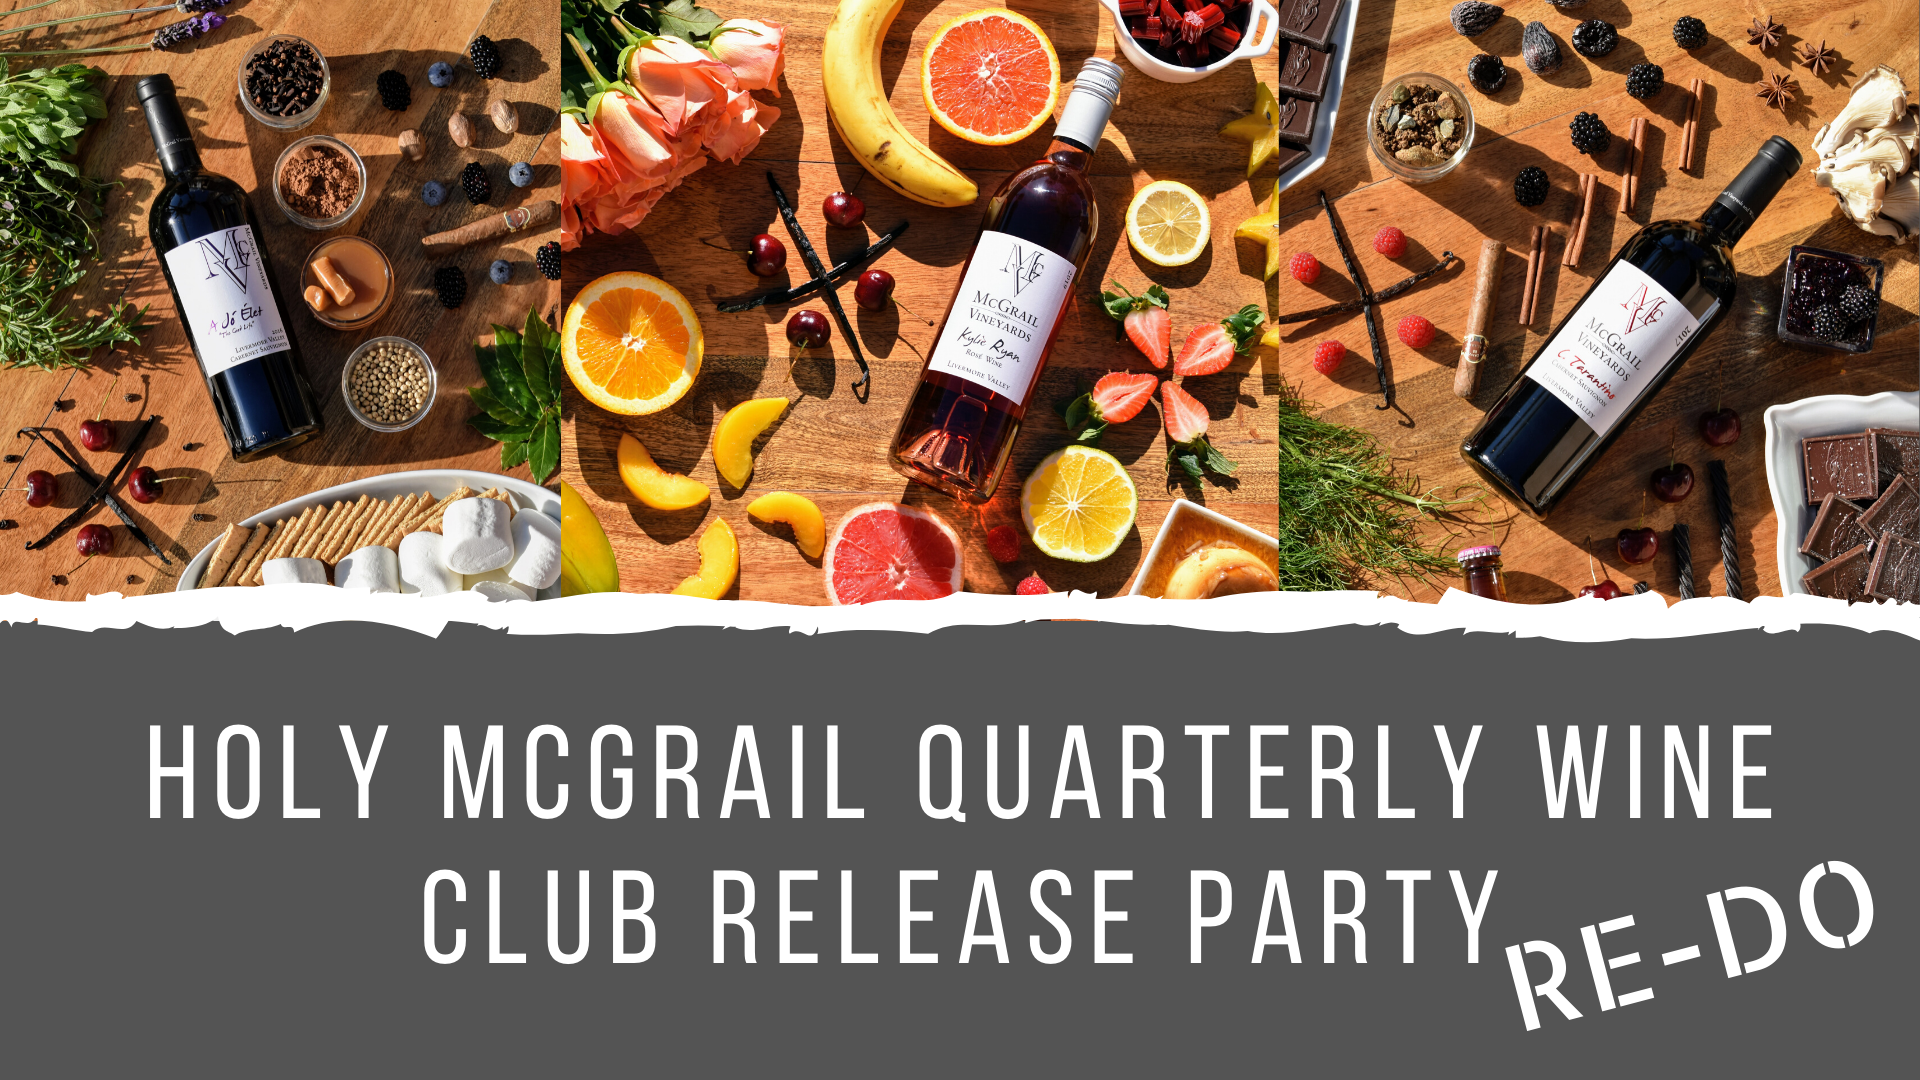 Holy McGrail Quarterly Wine Club Release Party RE-DO